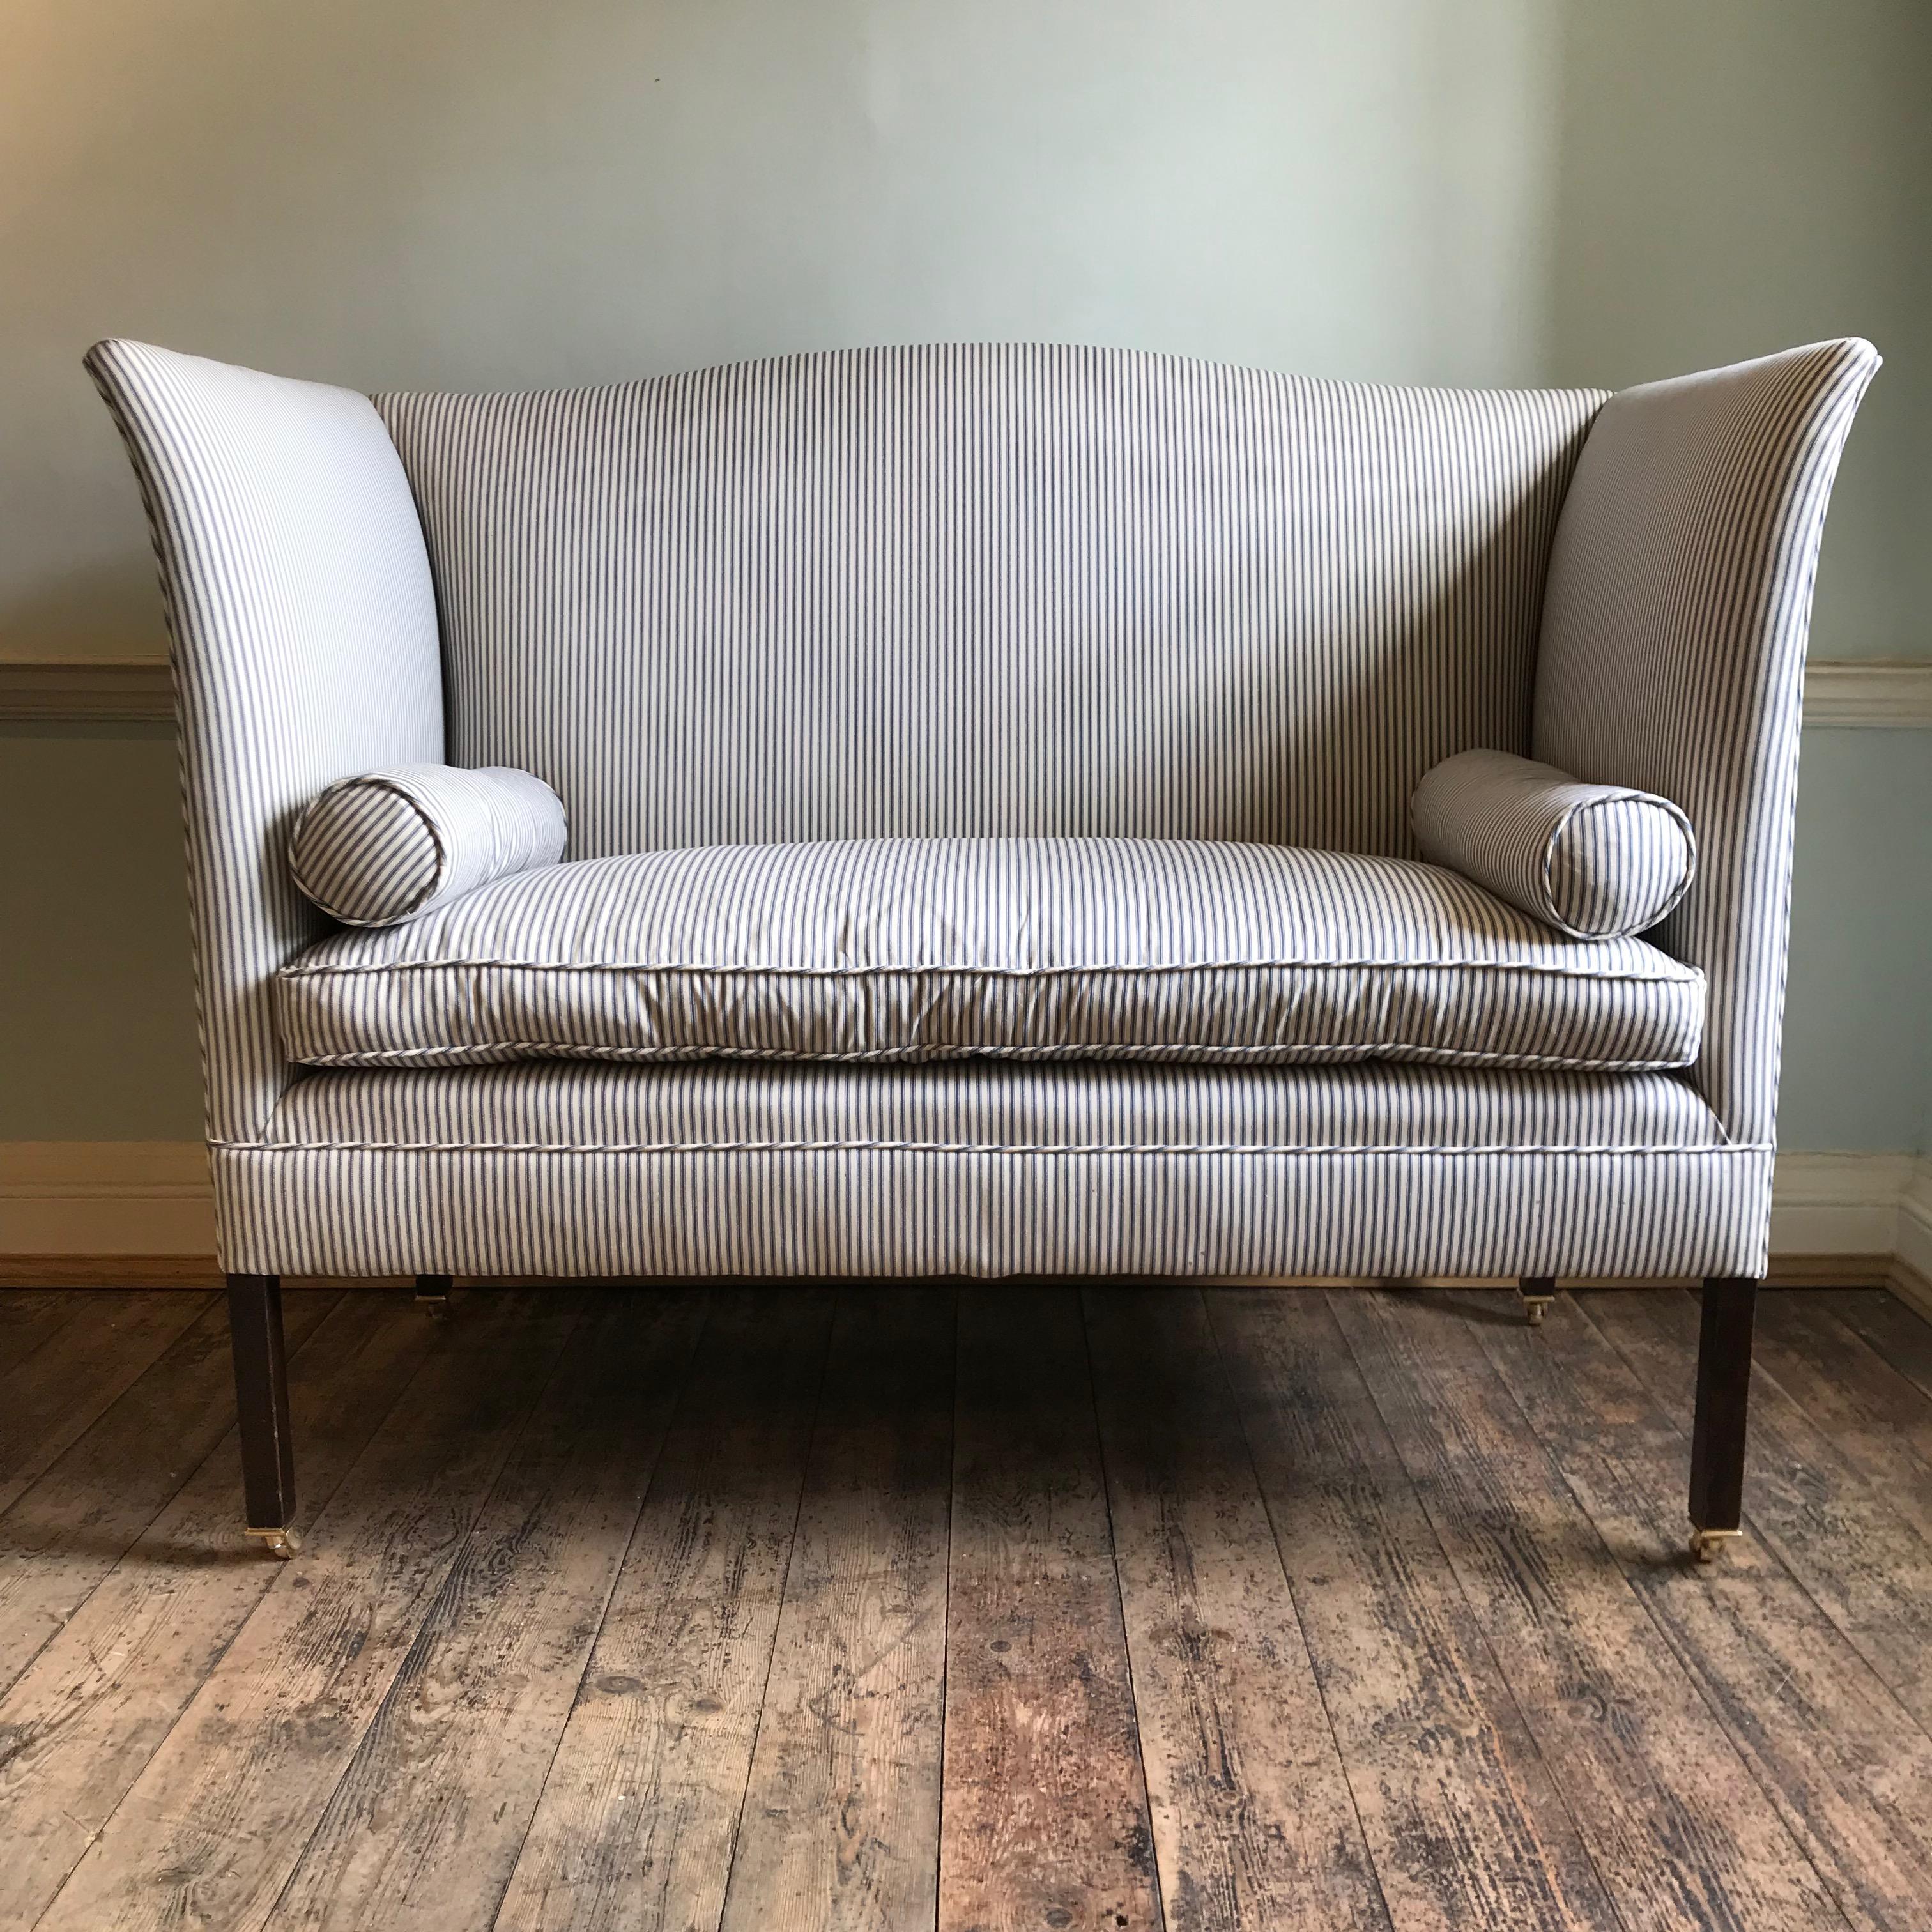 Edwardian Period Wingback Sofa Newly Upholstered in Striped Ticking In Good Condition For Sale In Tetbury, GB